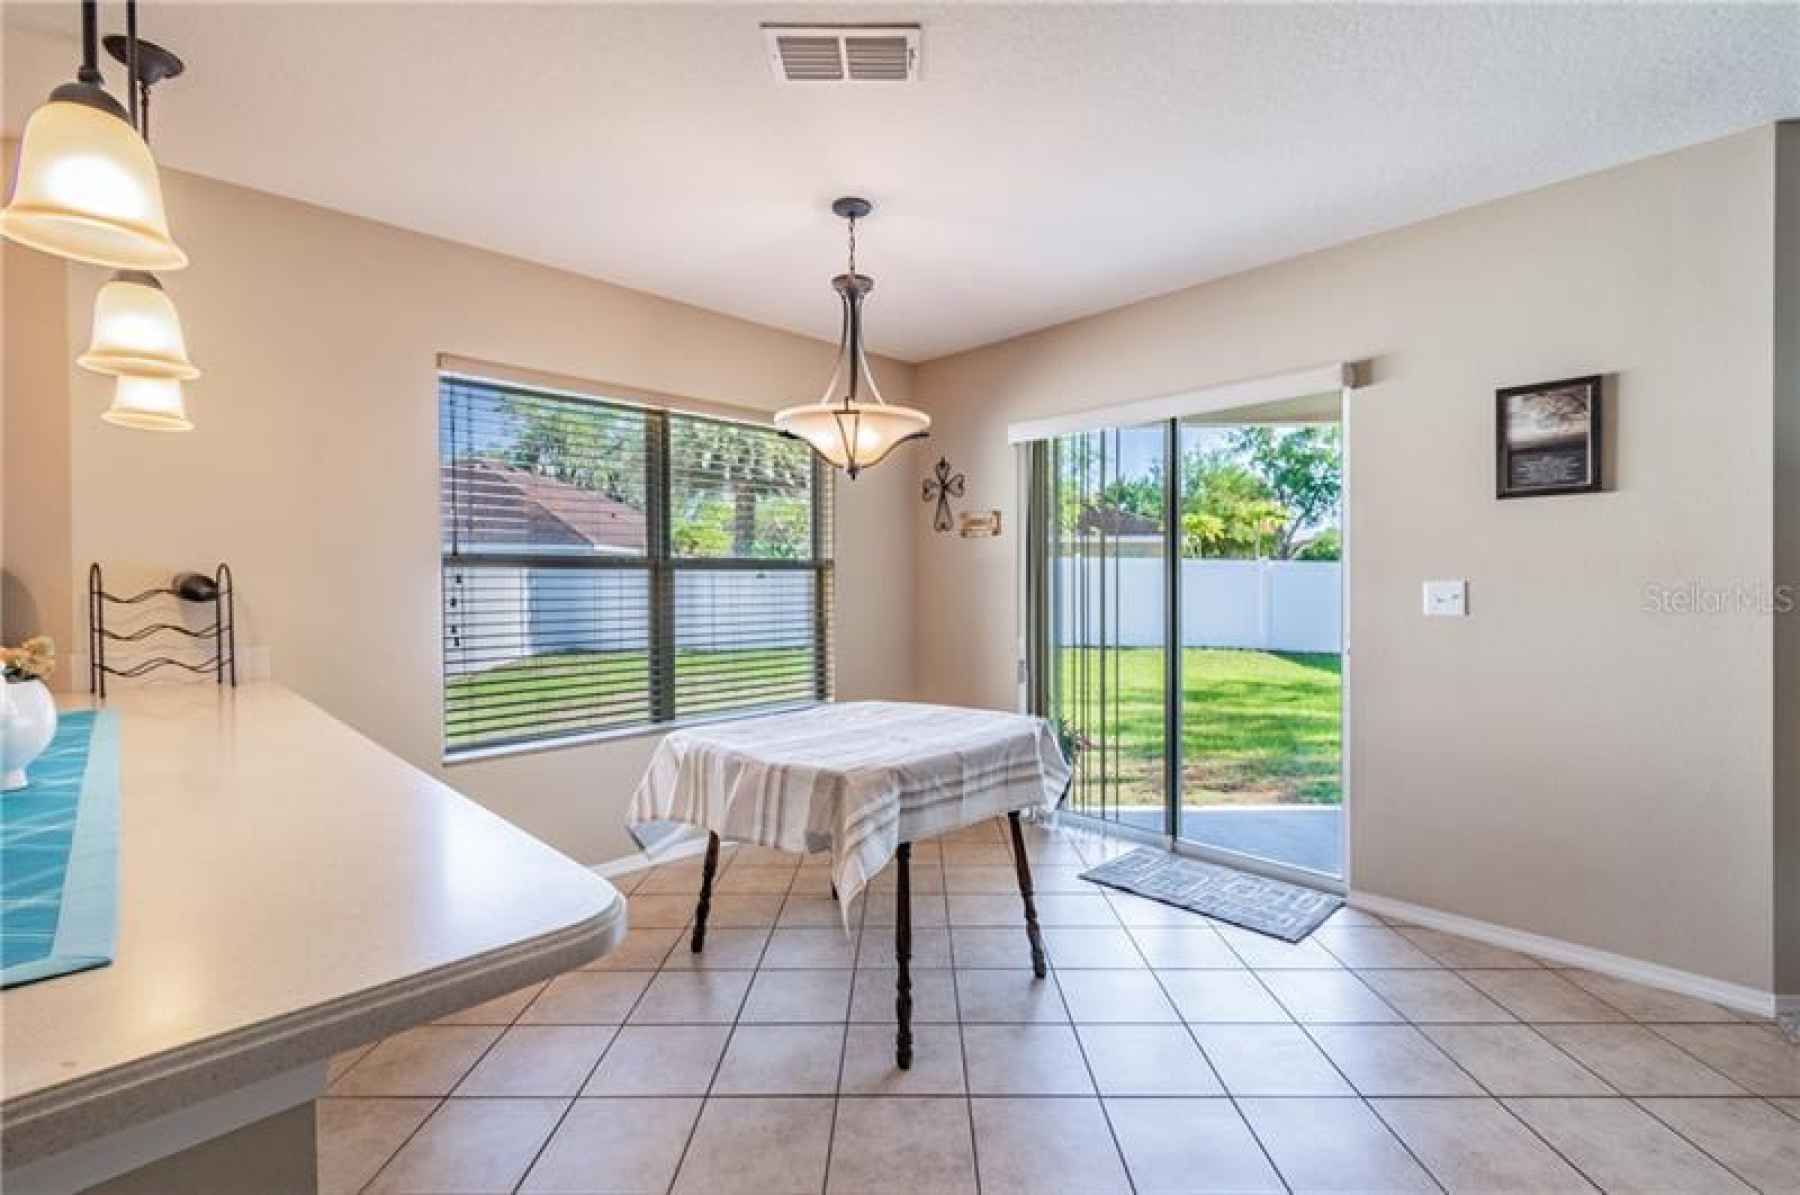 Dining room with doors leading to covered patio and fenced yard